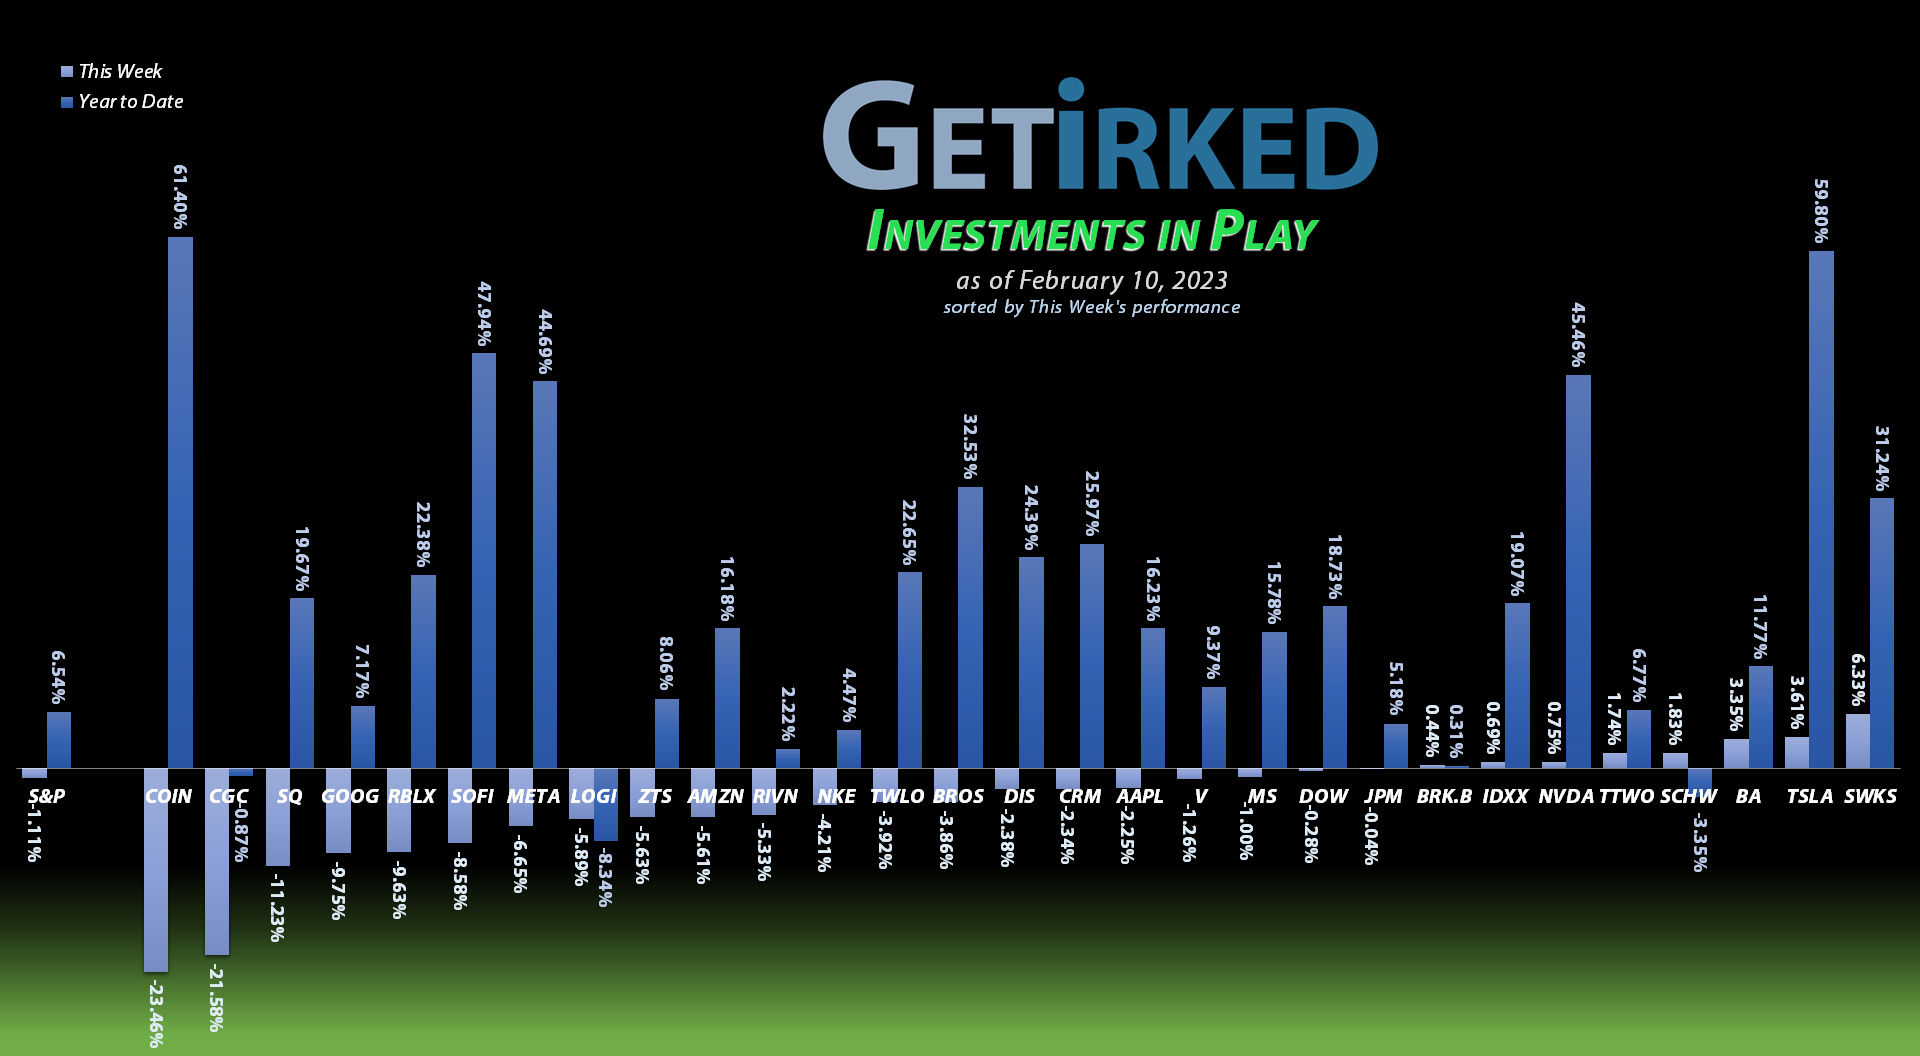 Get Irked - Investments in Play - February 10, 2023